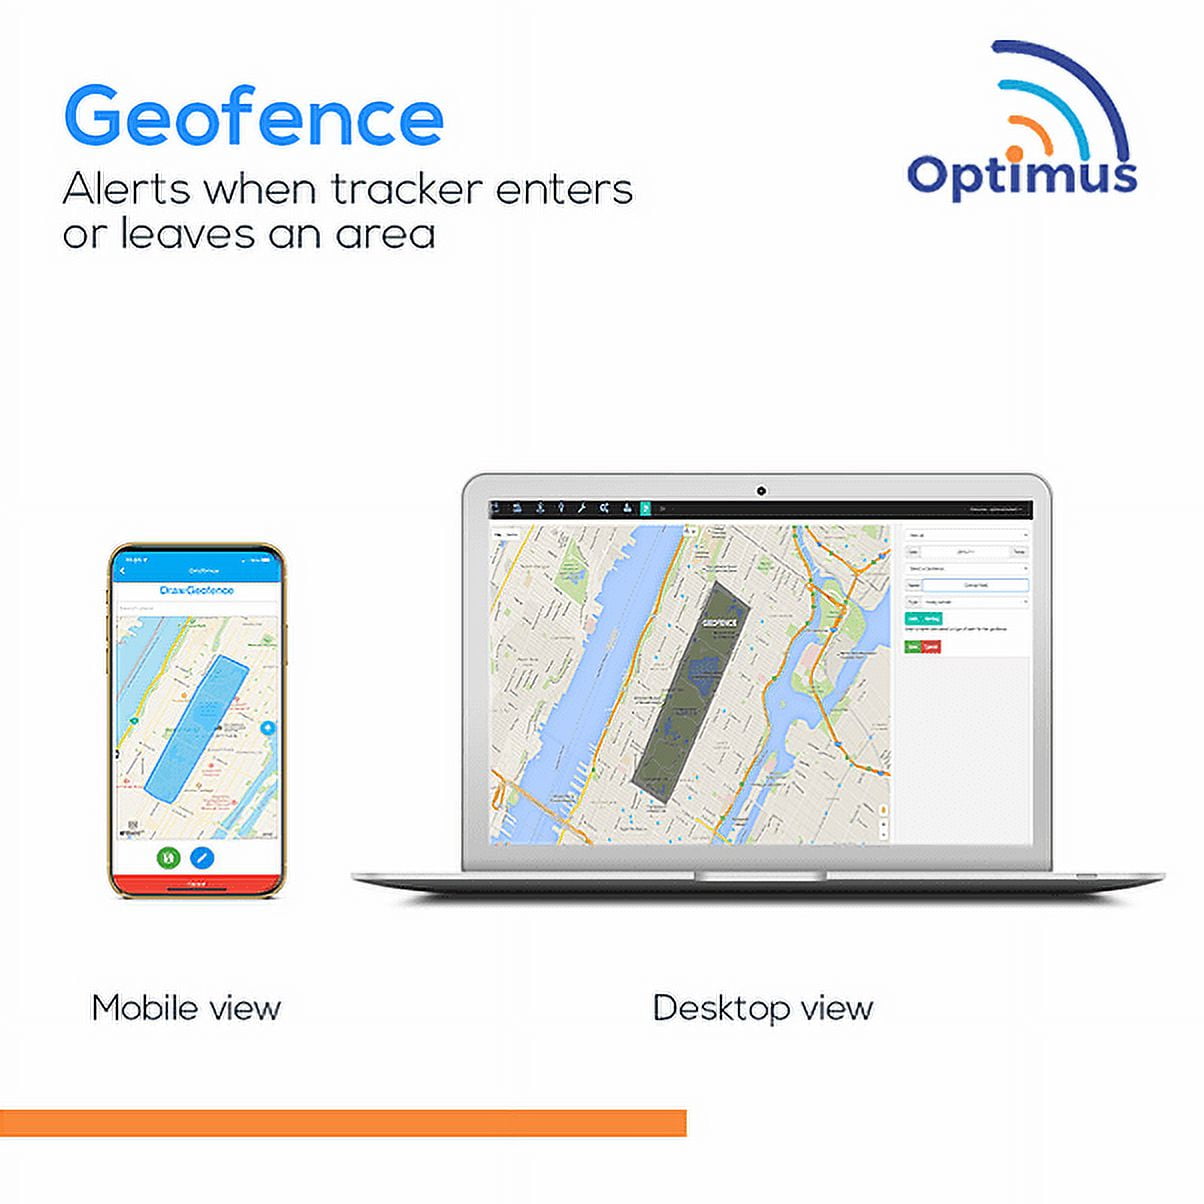 Optimus 3.0 Portable GPS Tracker for Cars, Trucks, People - 1 Month